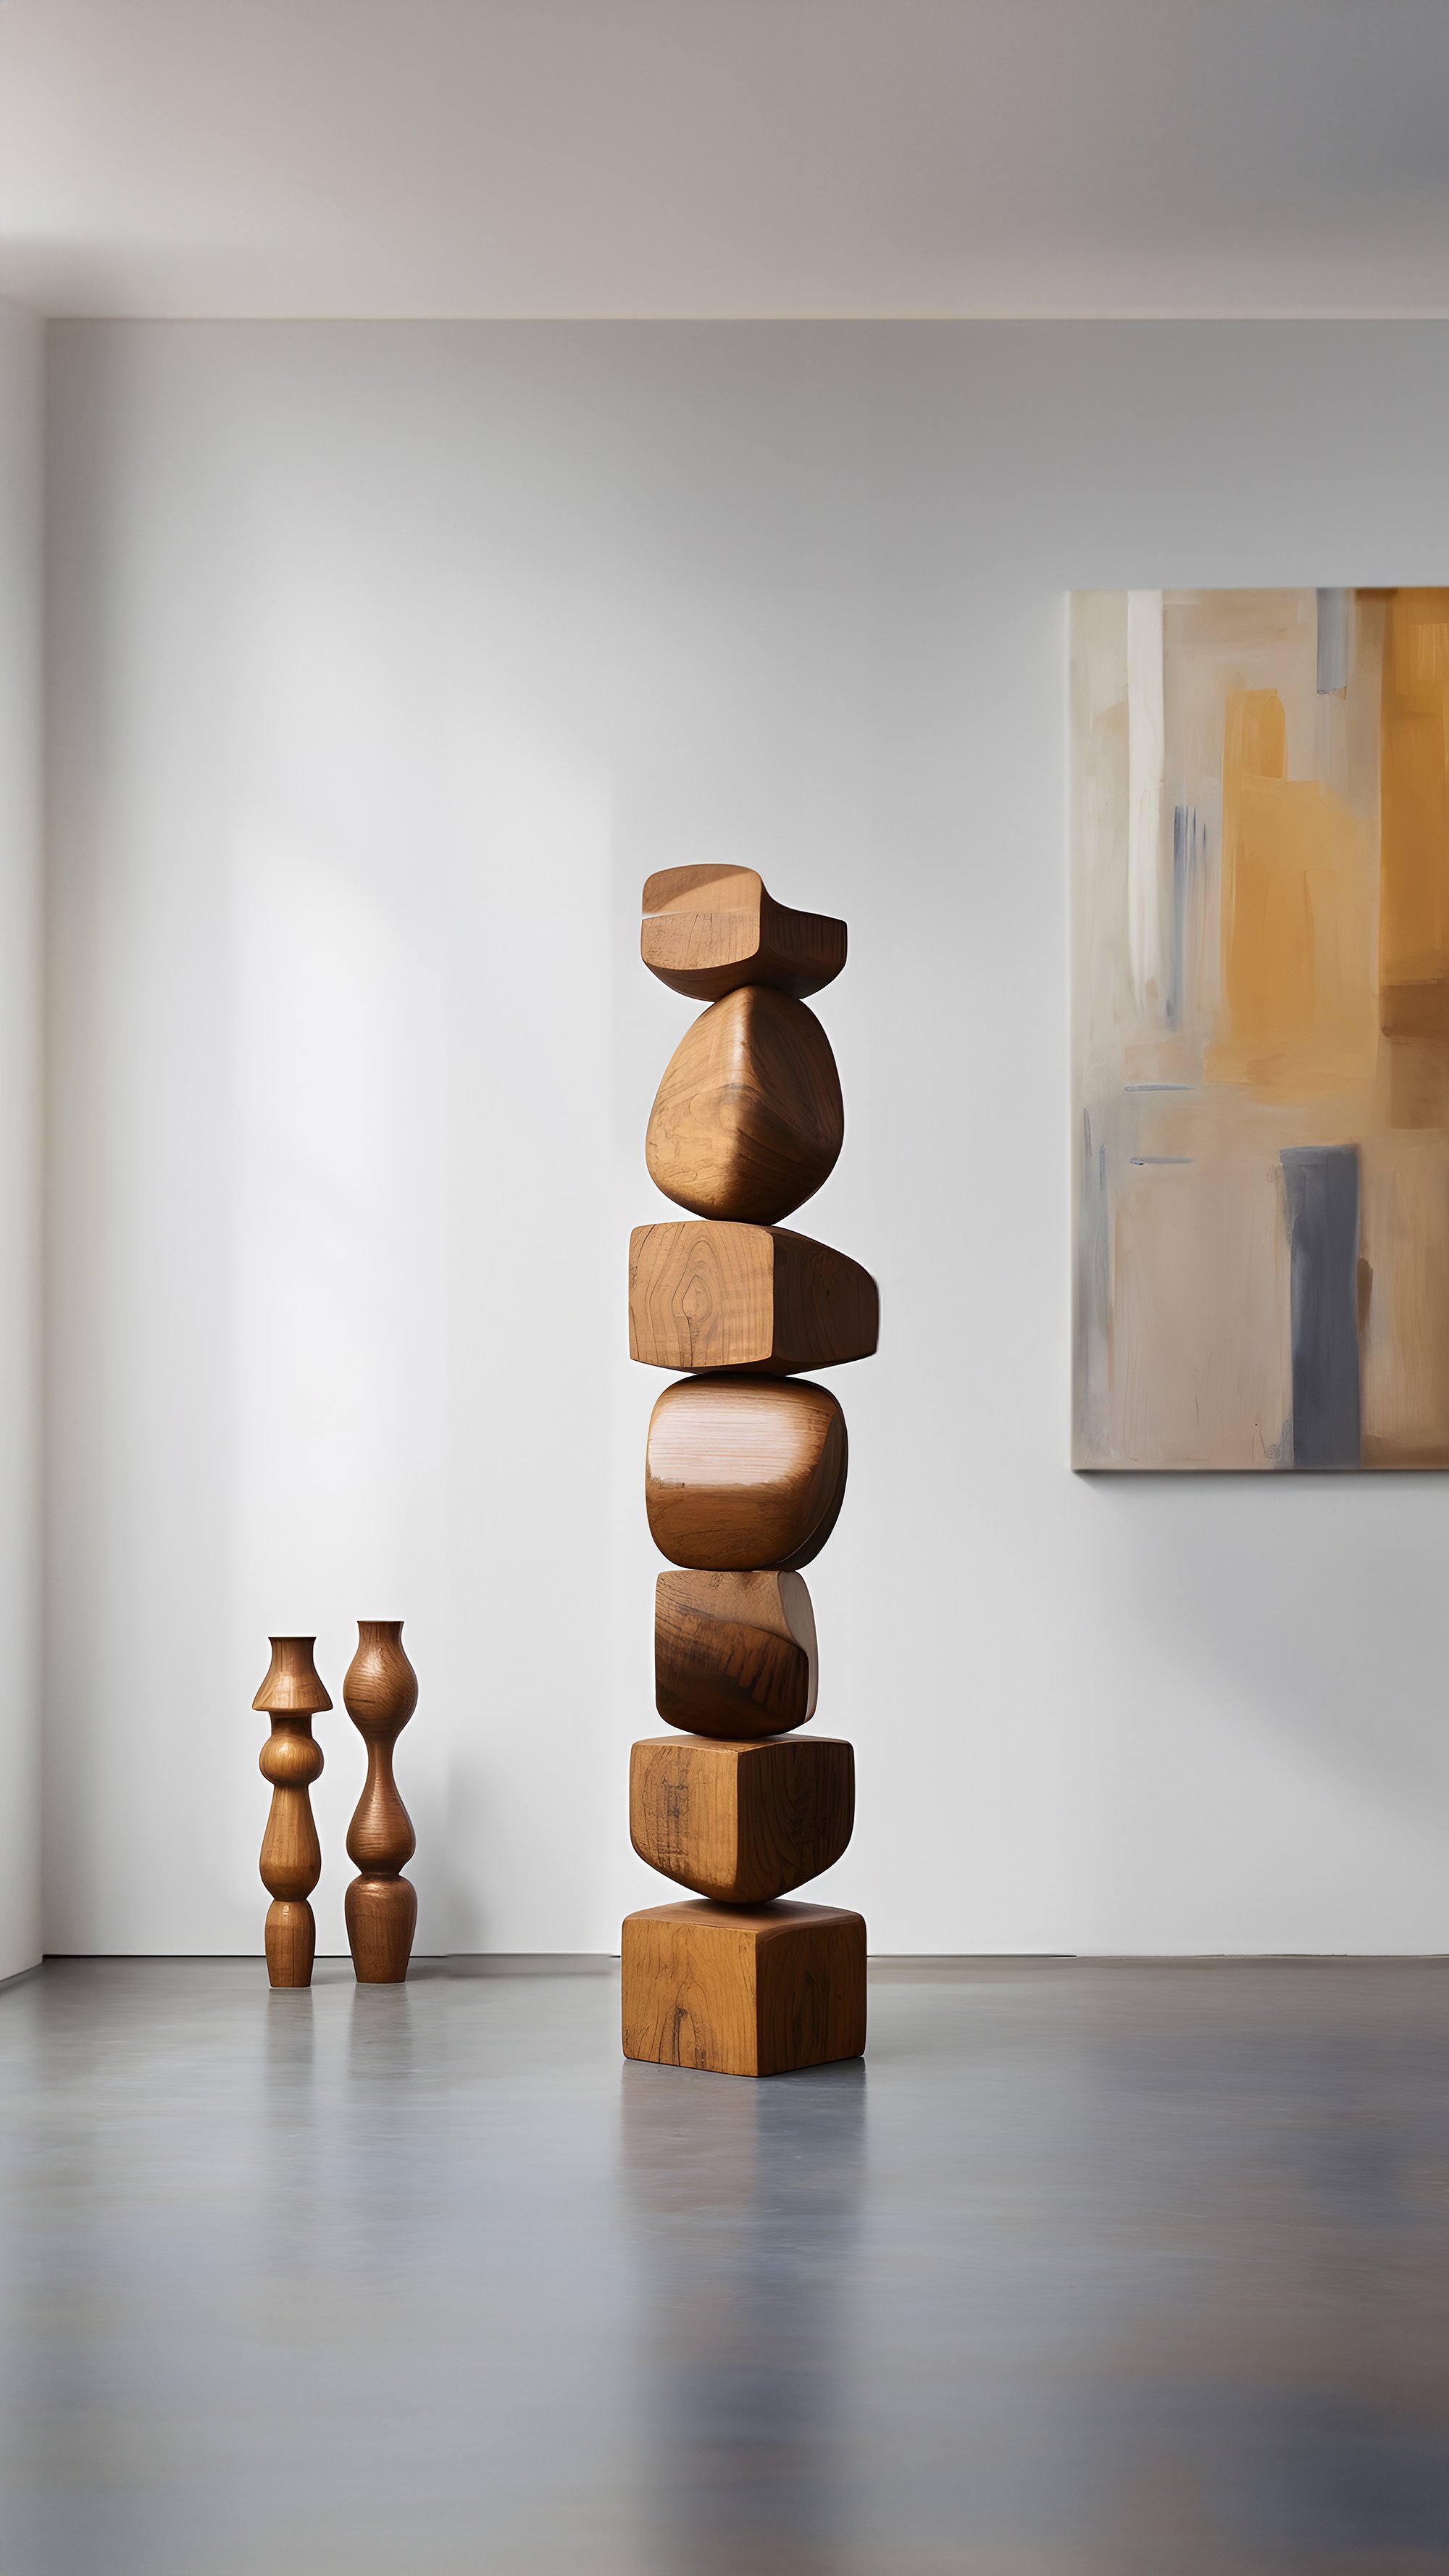 Carved Wooden Elegance Still Stand No72 Abstract Totem by Joel Escalona — 5.jpg